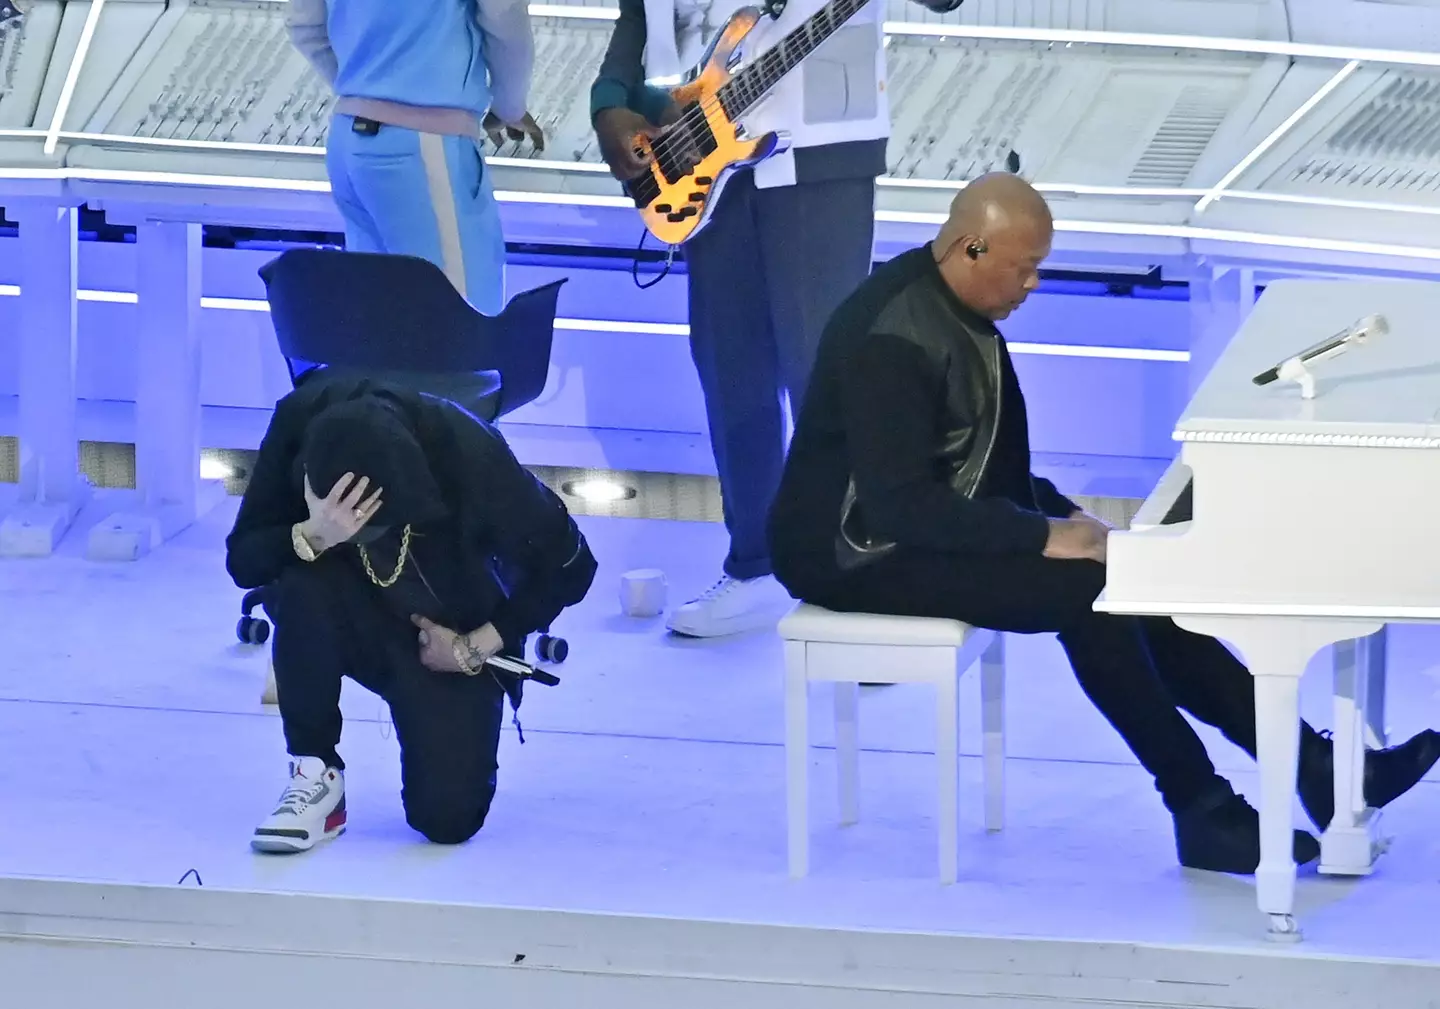 Eminem took a knee during the performance.